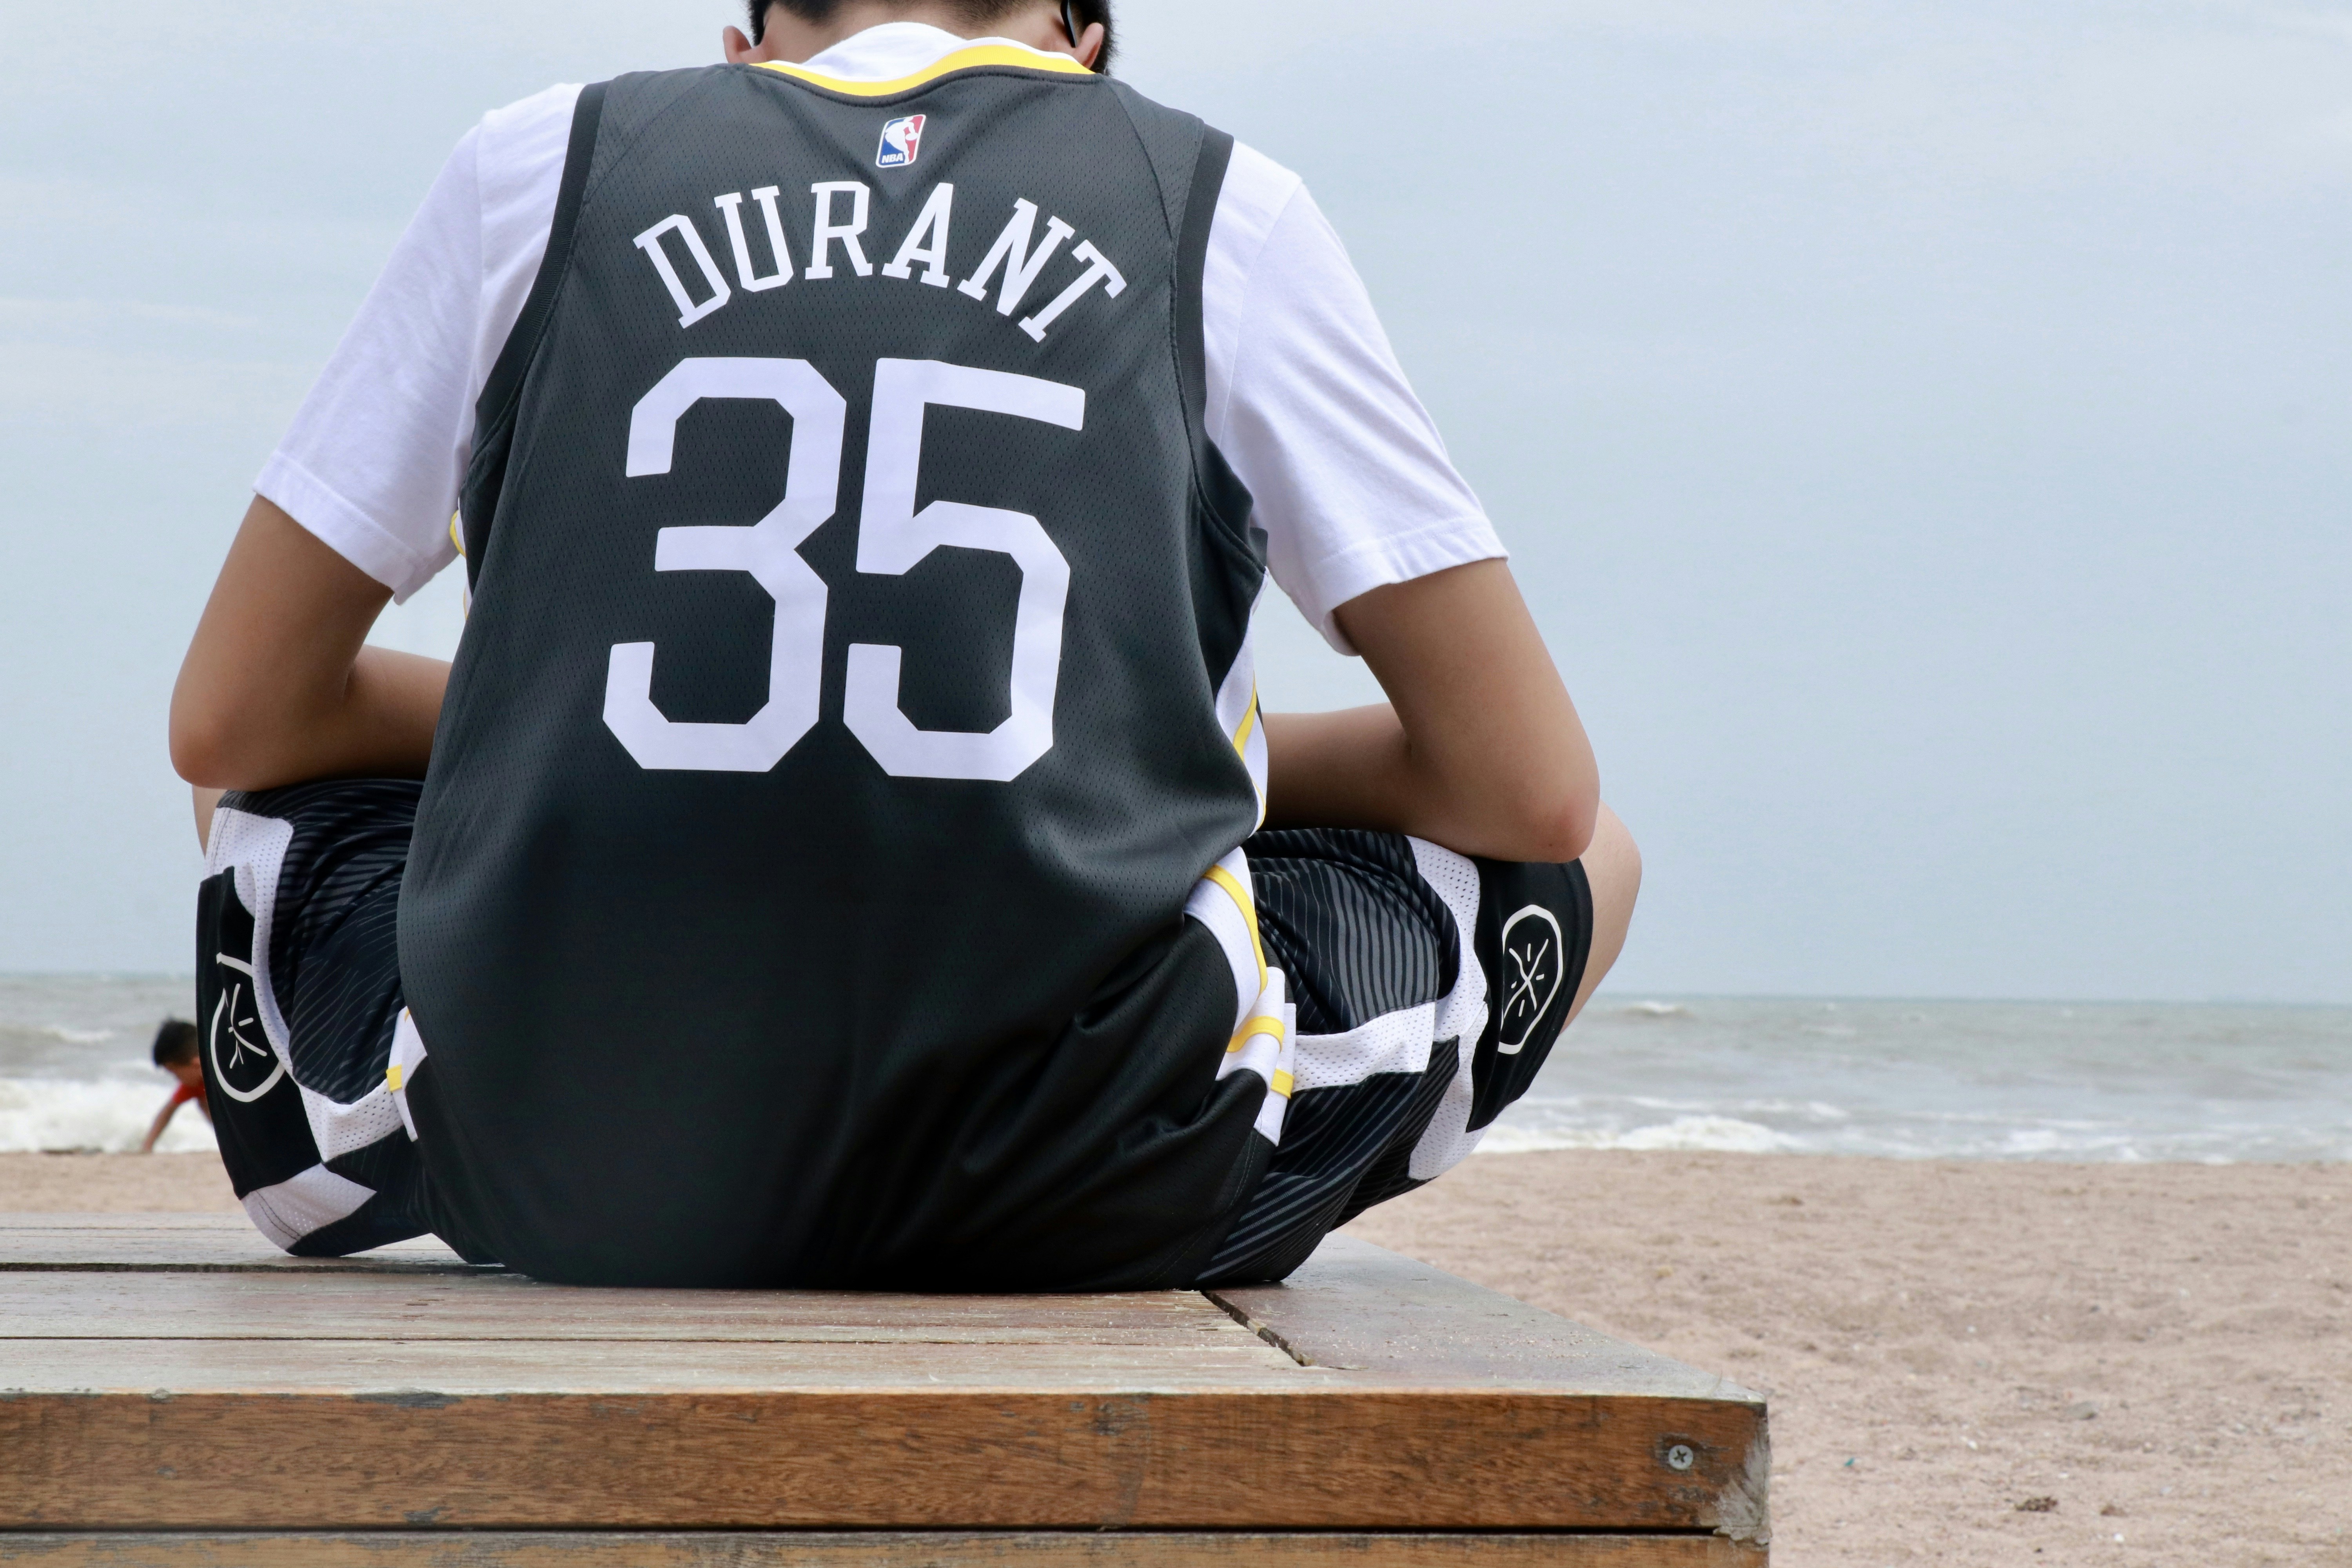 I'm wearing Durant's jersey and sitting on the beach in Qingdao